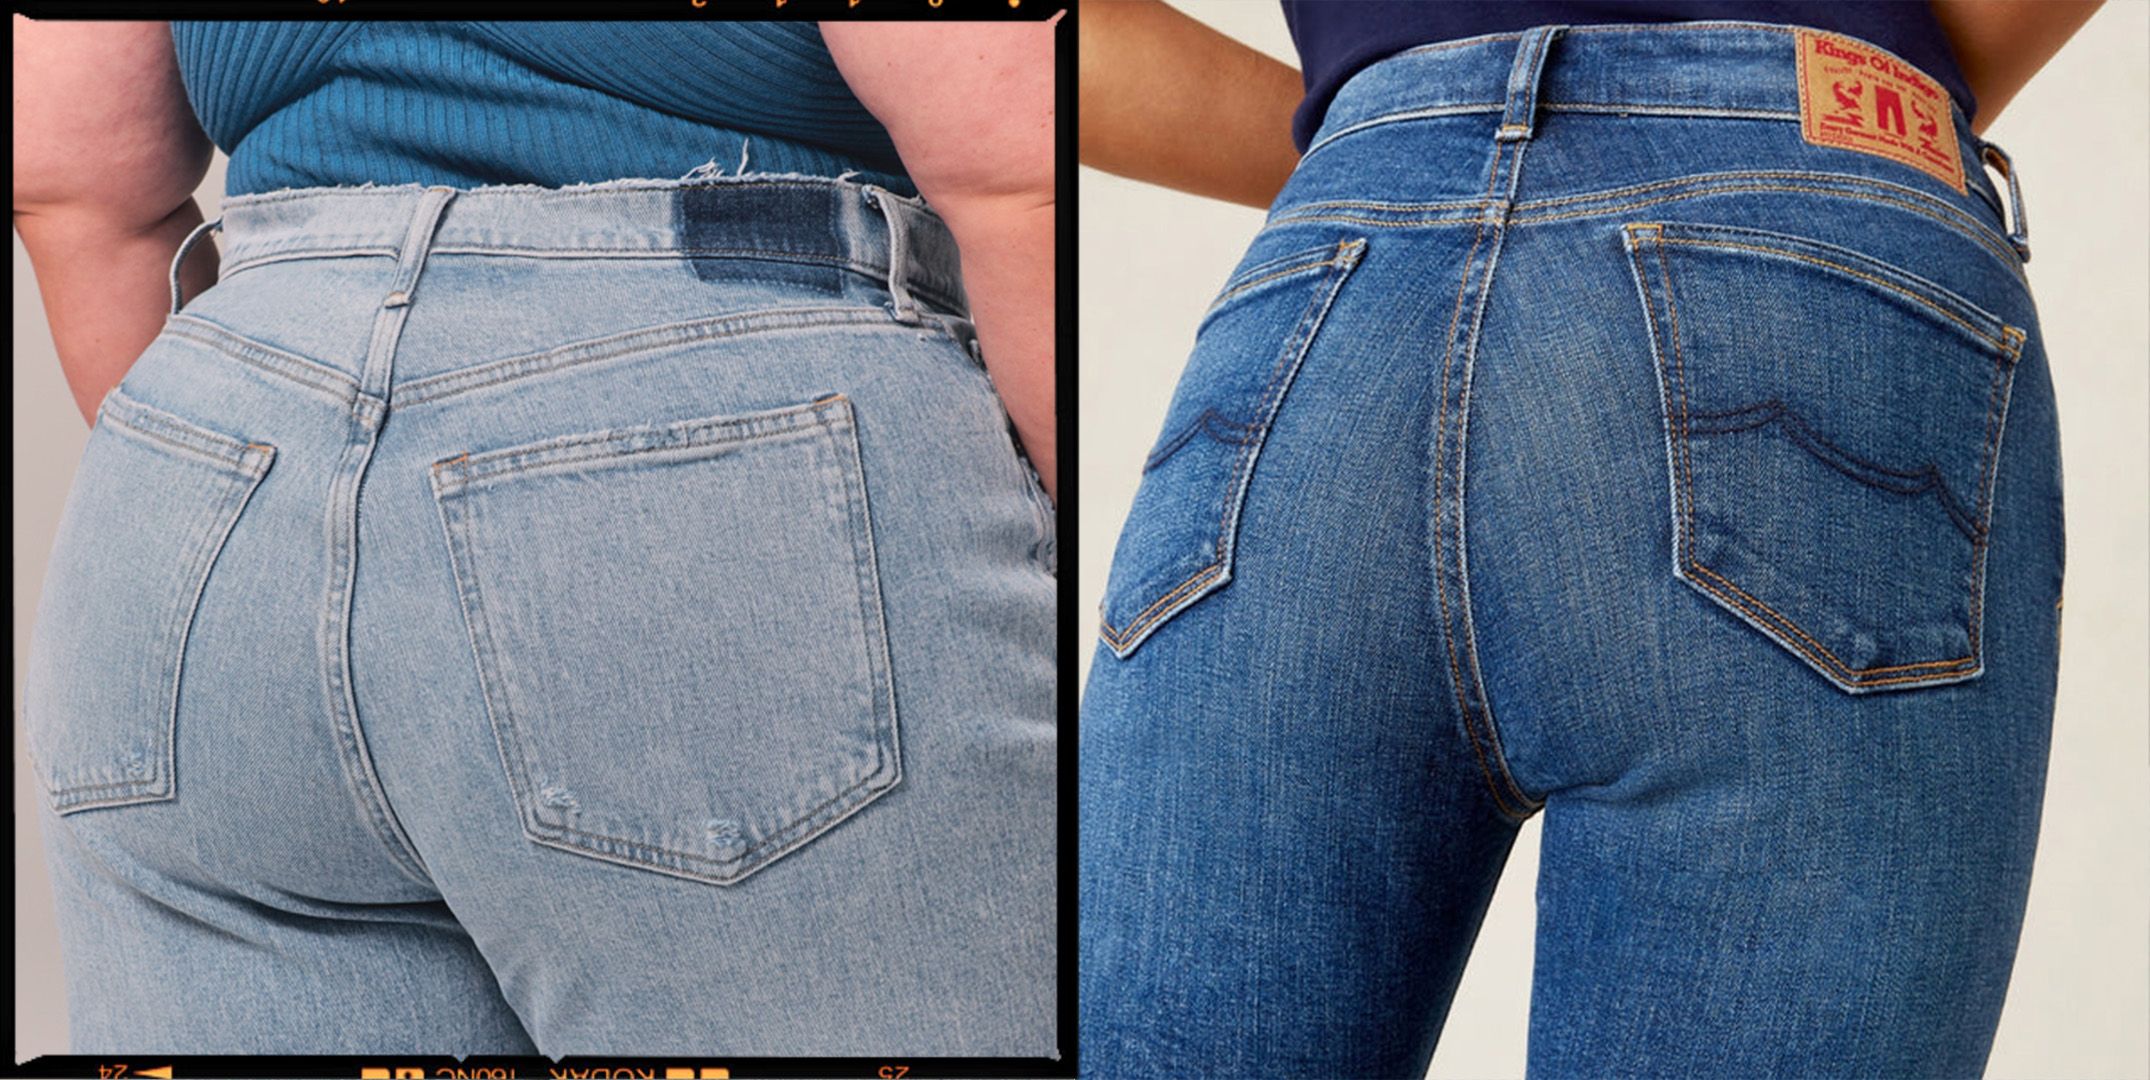 Bum lift jeans  We tried 132 pairs to find the best ones